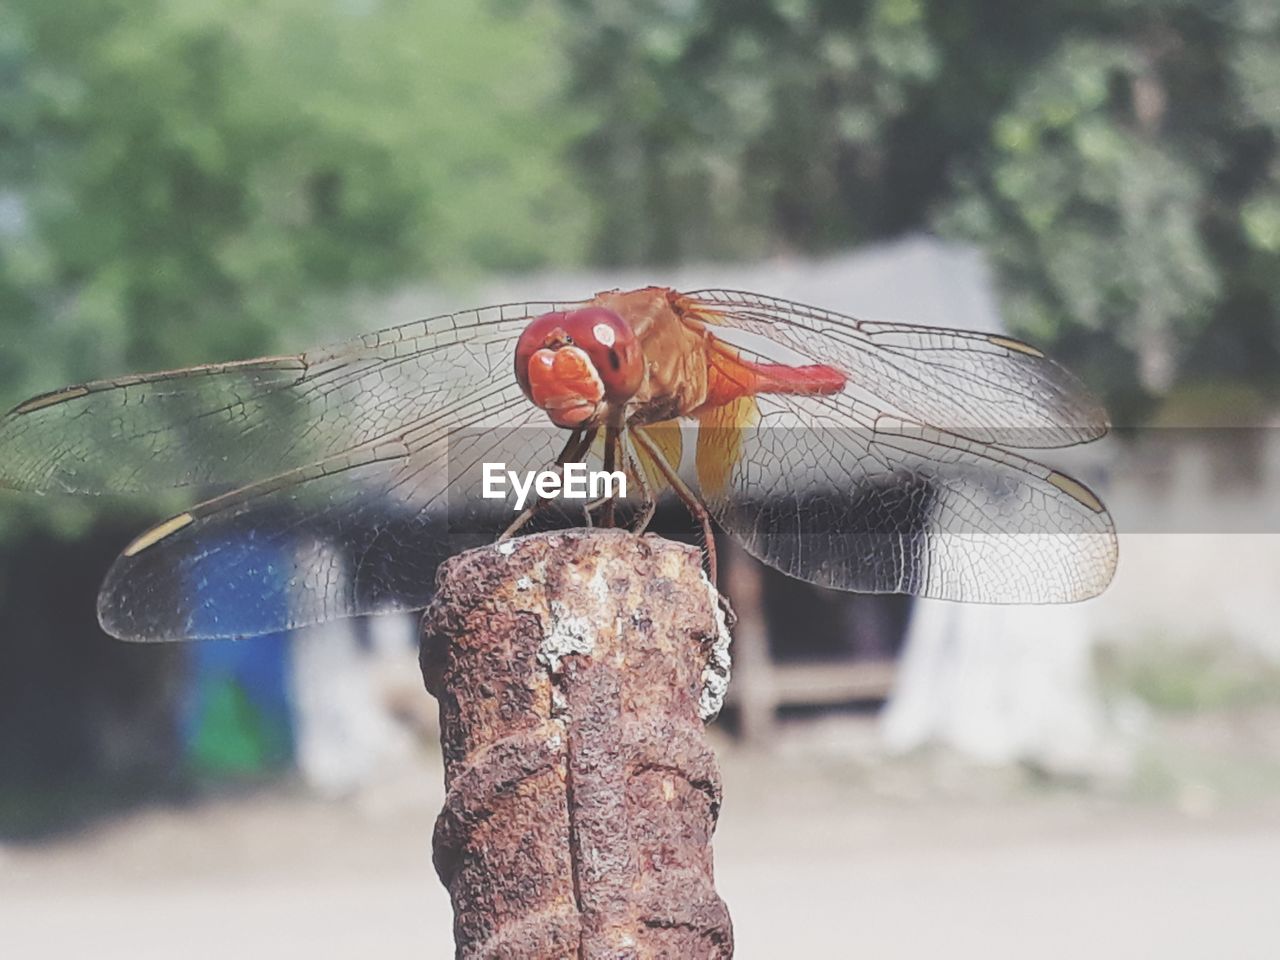 CLOSE-UP OF DRAGONFLY ON PLANT AGAINST BLURRED BACKGROUND